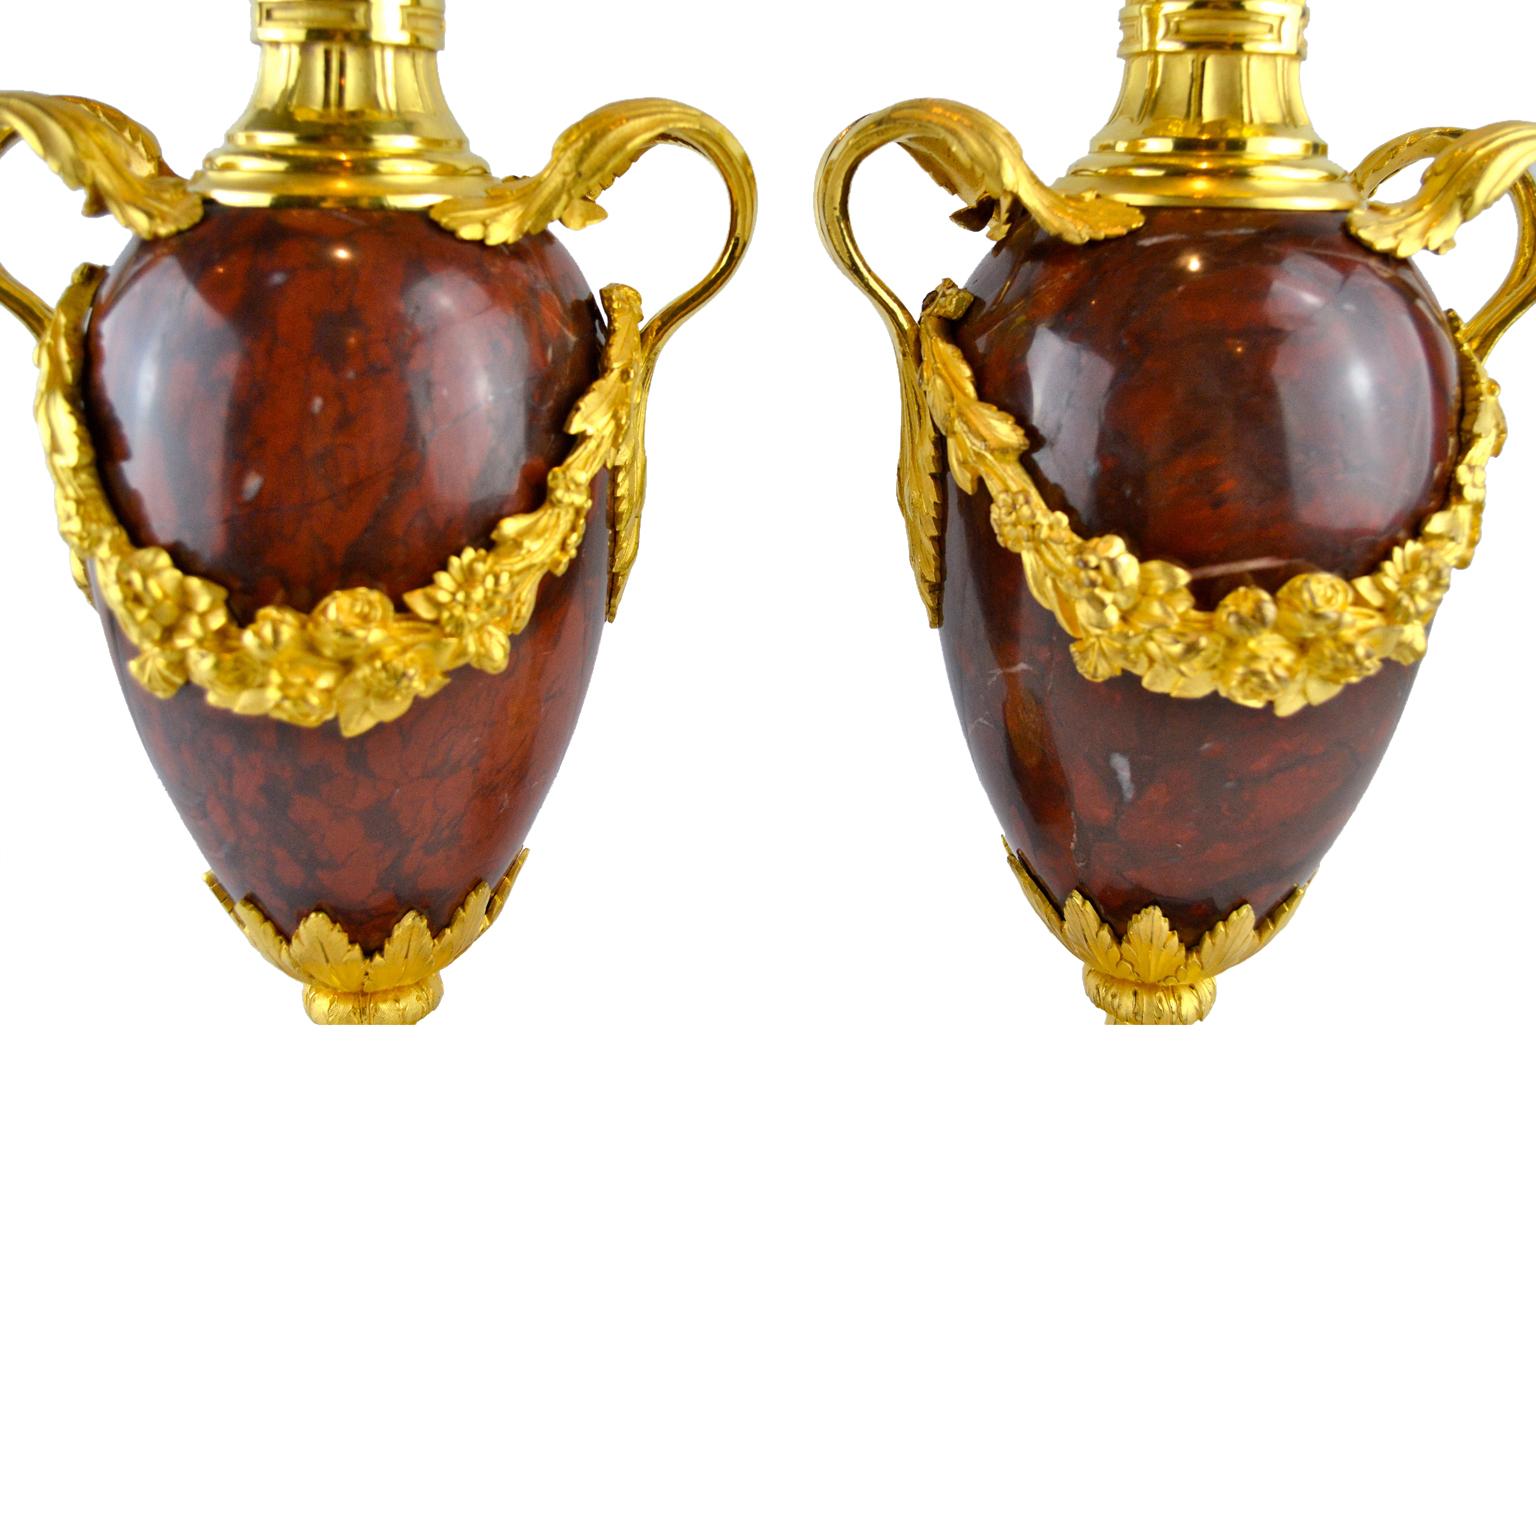 A fine pair of griotte (red), marble and gilded bronze casolettes in the Louis XVI style. The ovoid red marble body is decorated with gilt bronze handles joining gilt floral garlands across the front and back. The tapering bottom of the 'urn' is